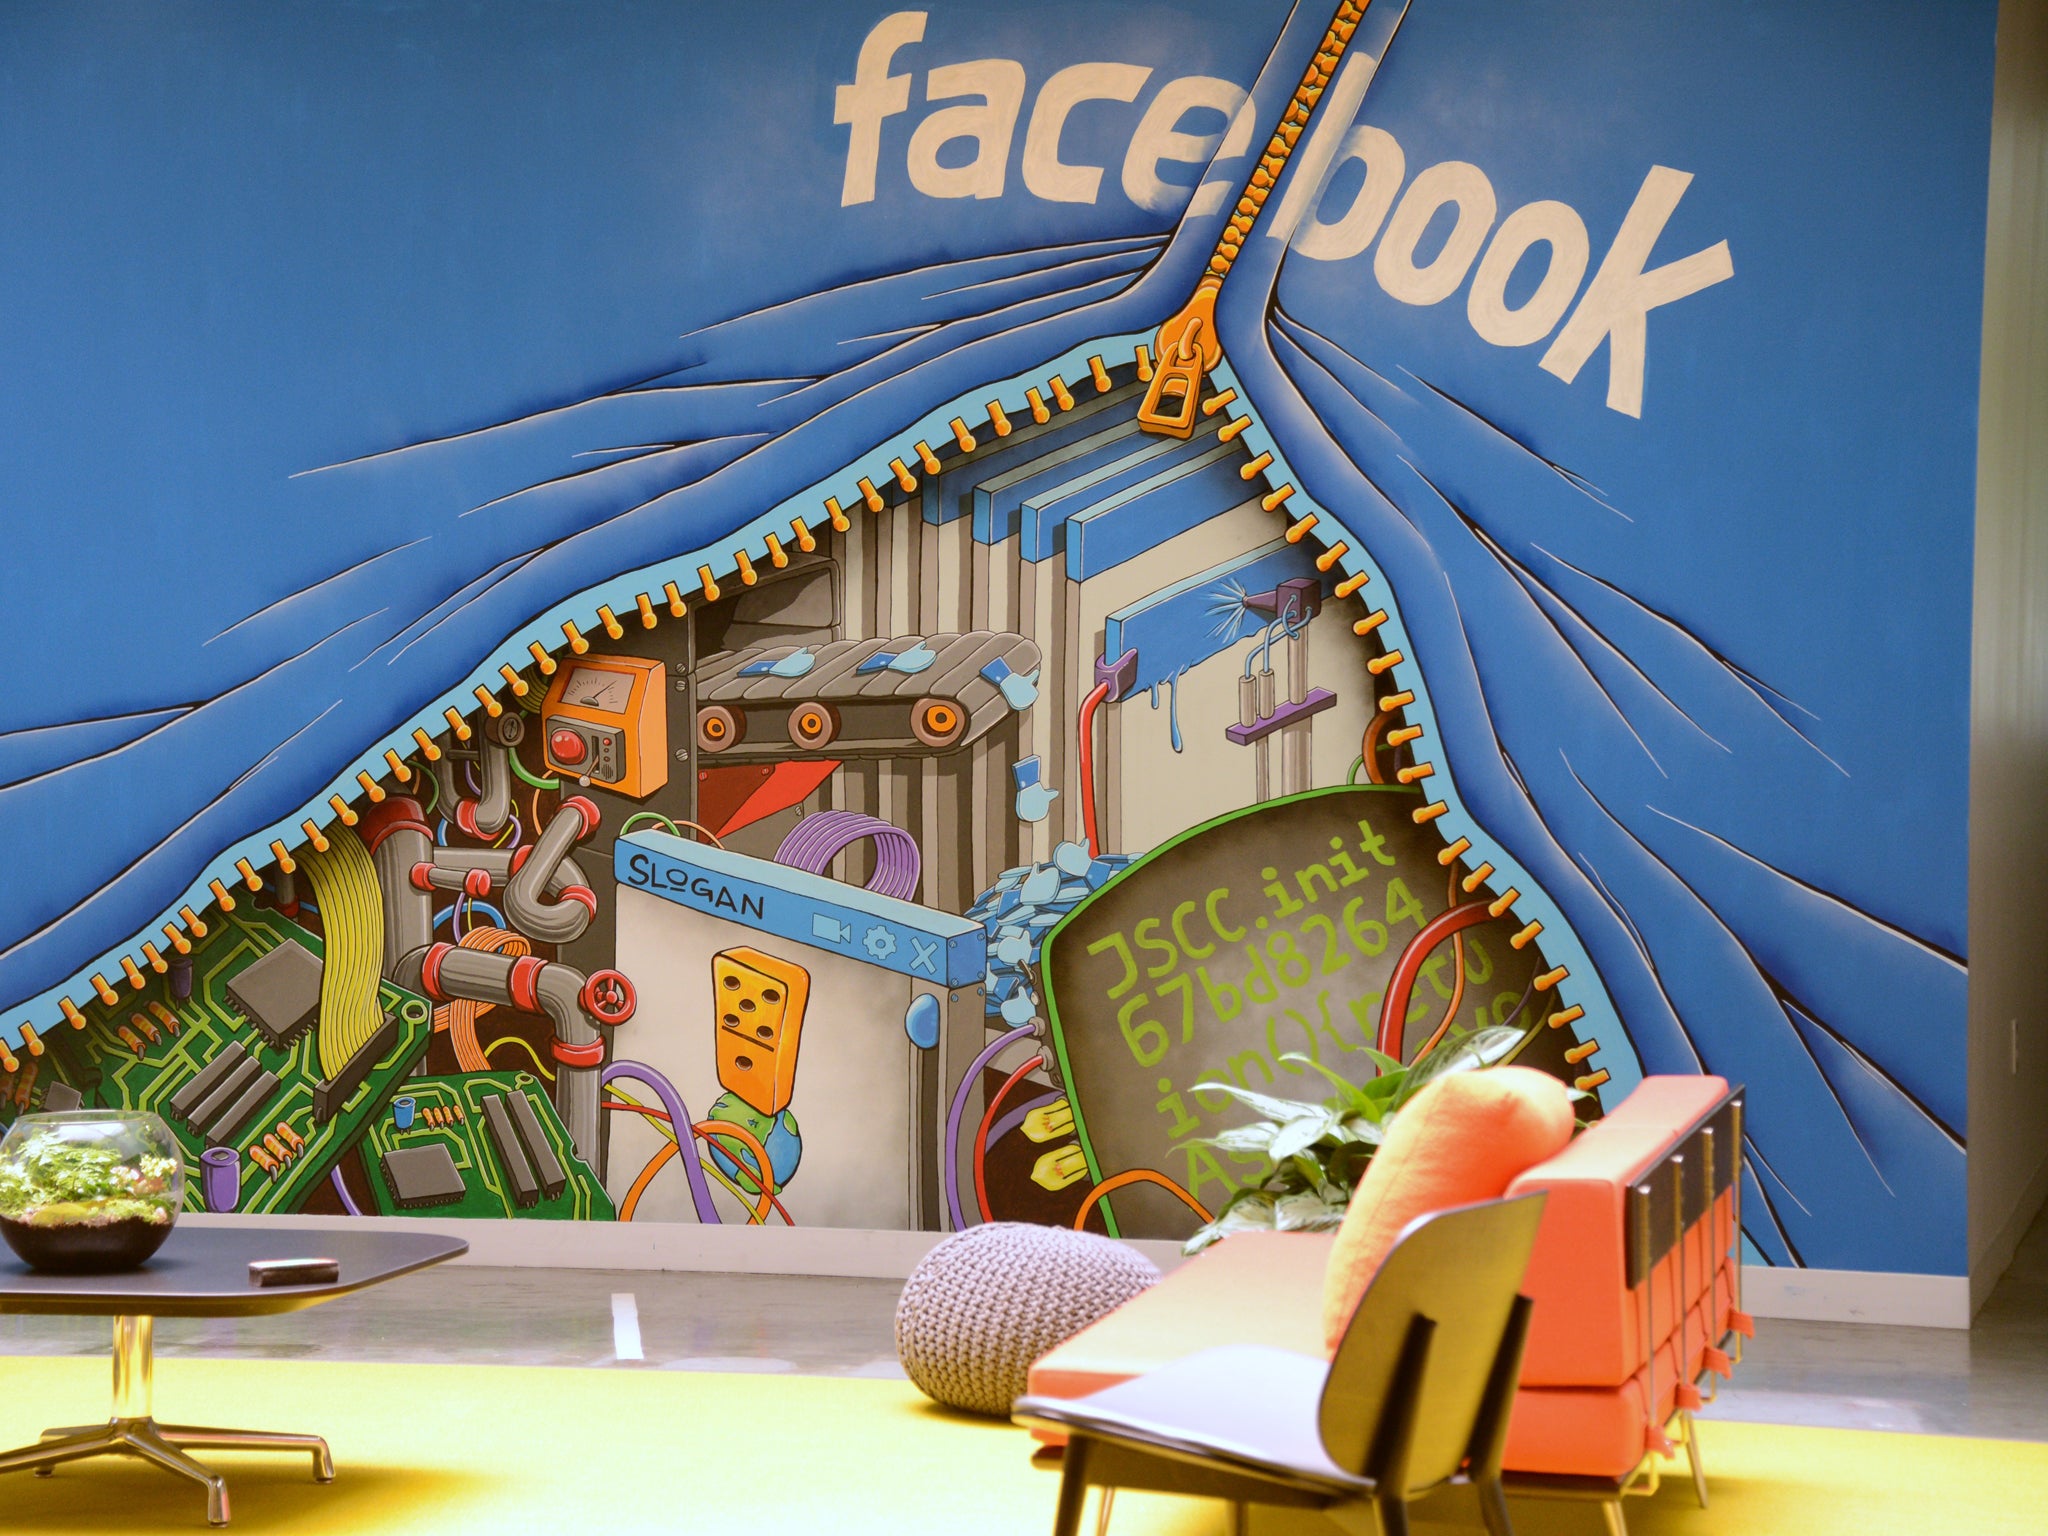 Facebook employees get free food for breakfast, lunch and dinner, plus a healthy work environment